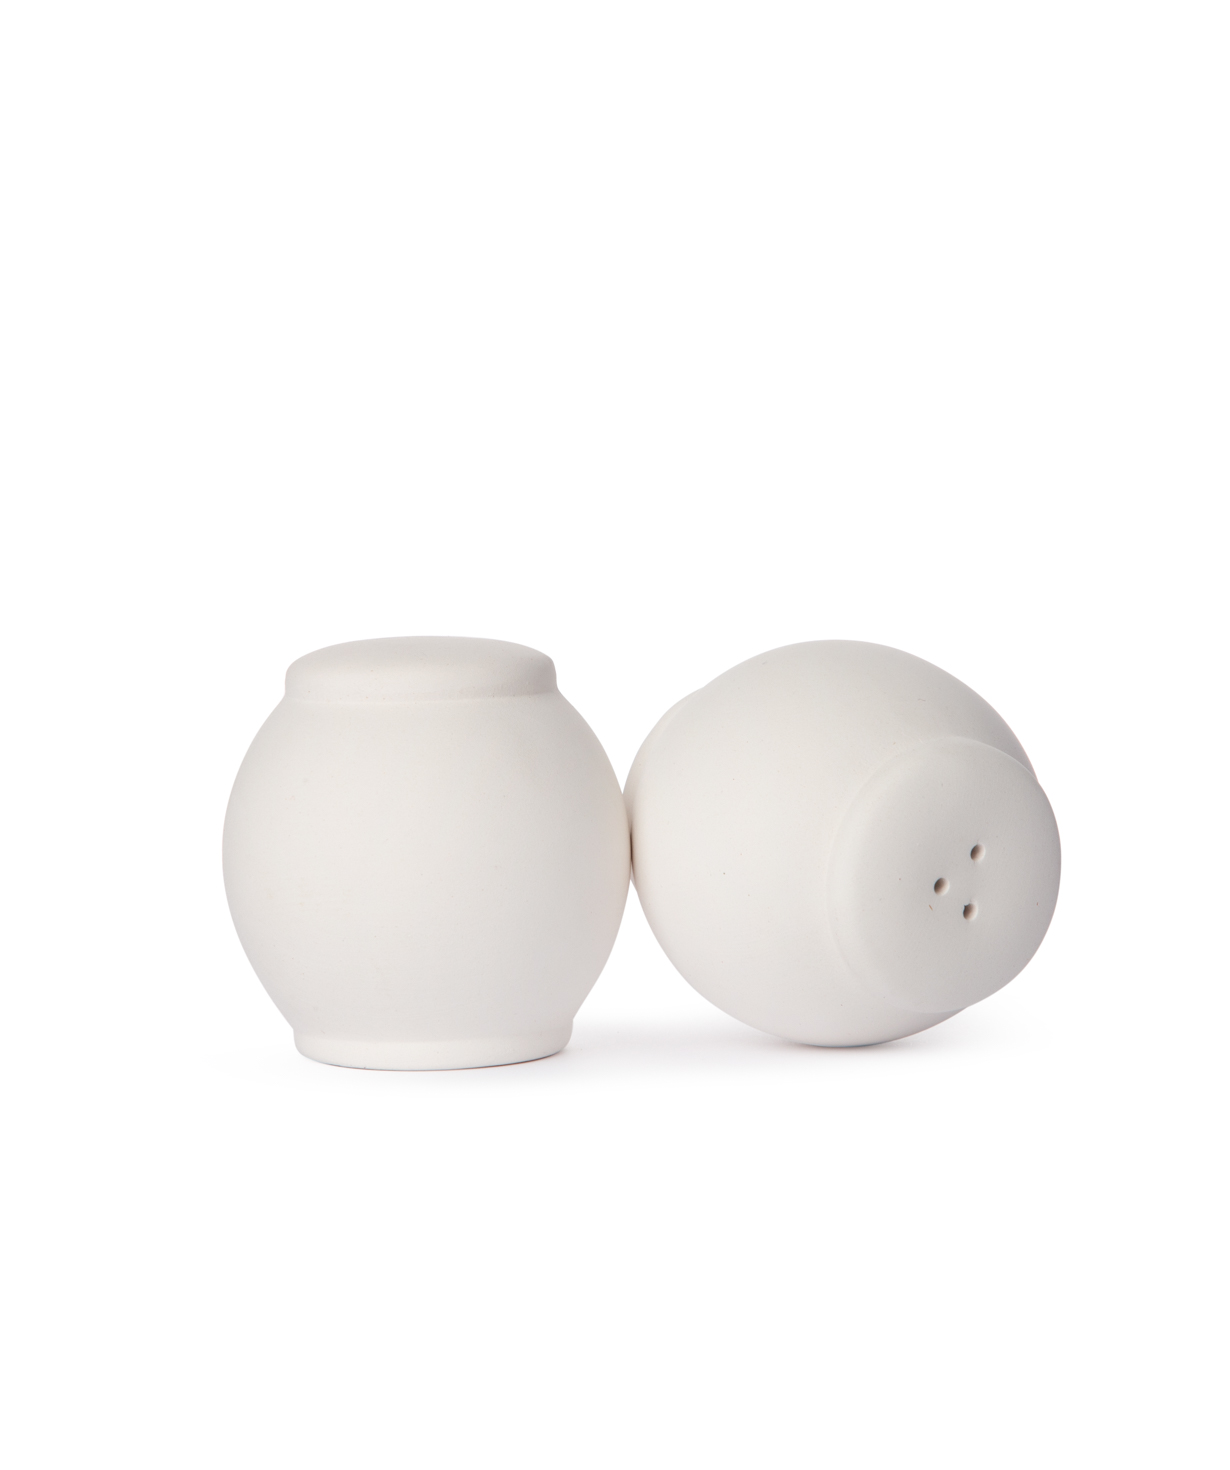 Collection `Yes Republic` art, salt shakers